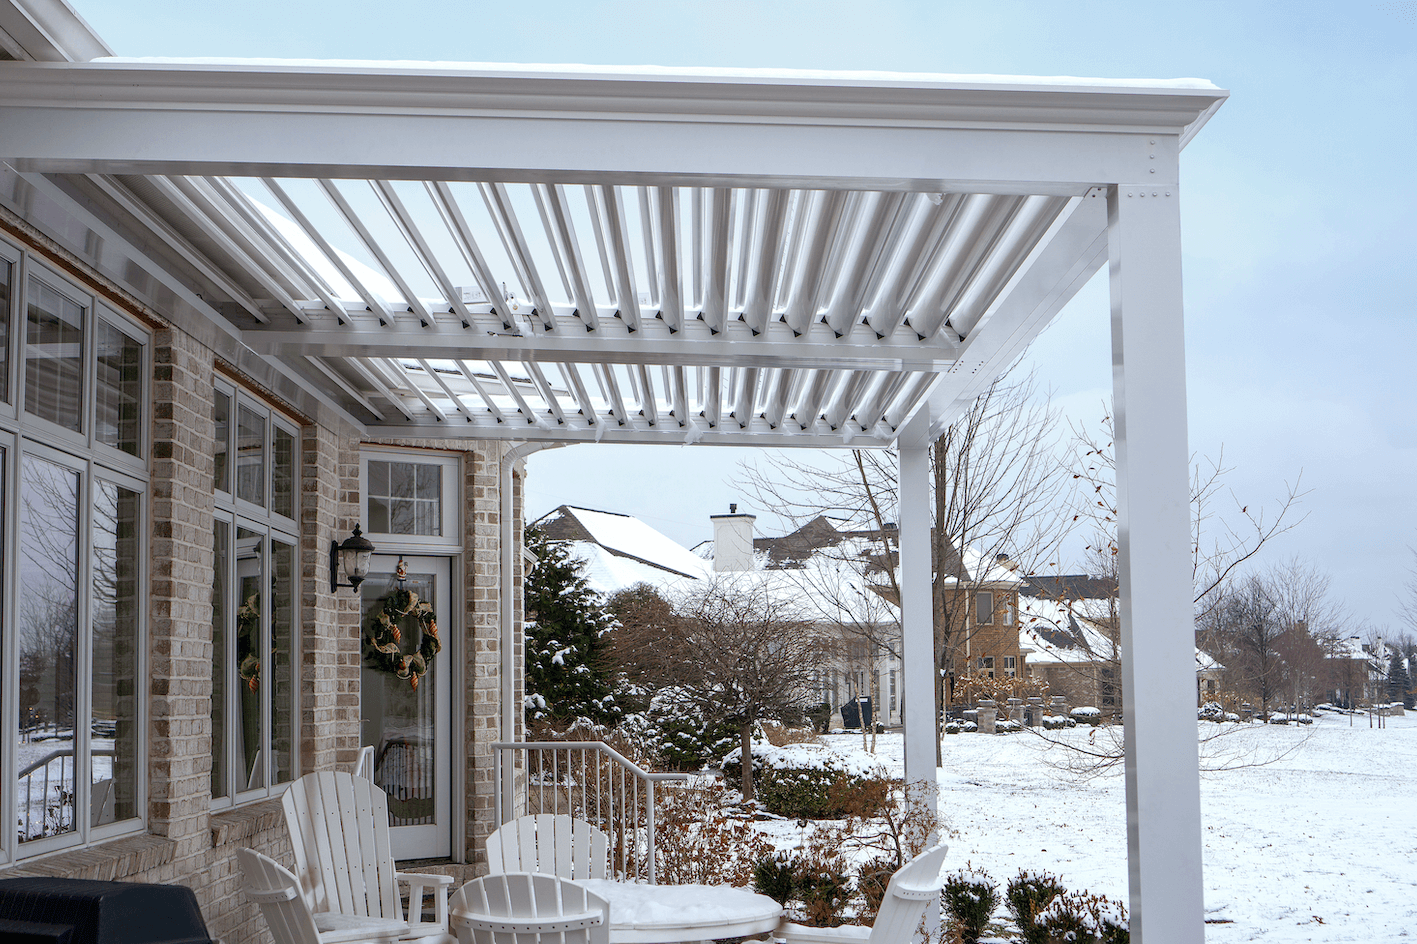 snowy landscape with pergola attached to house not freestanding